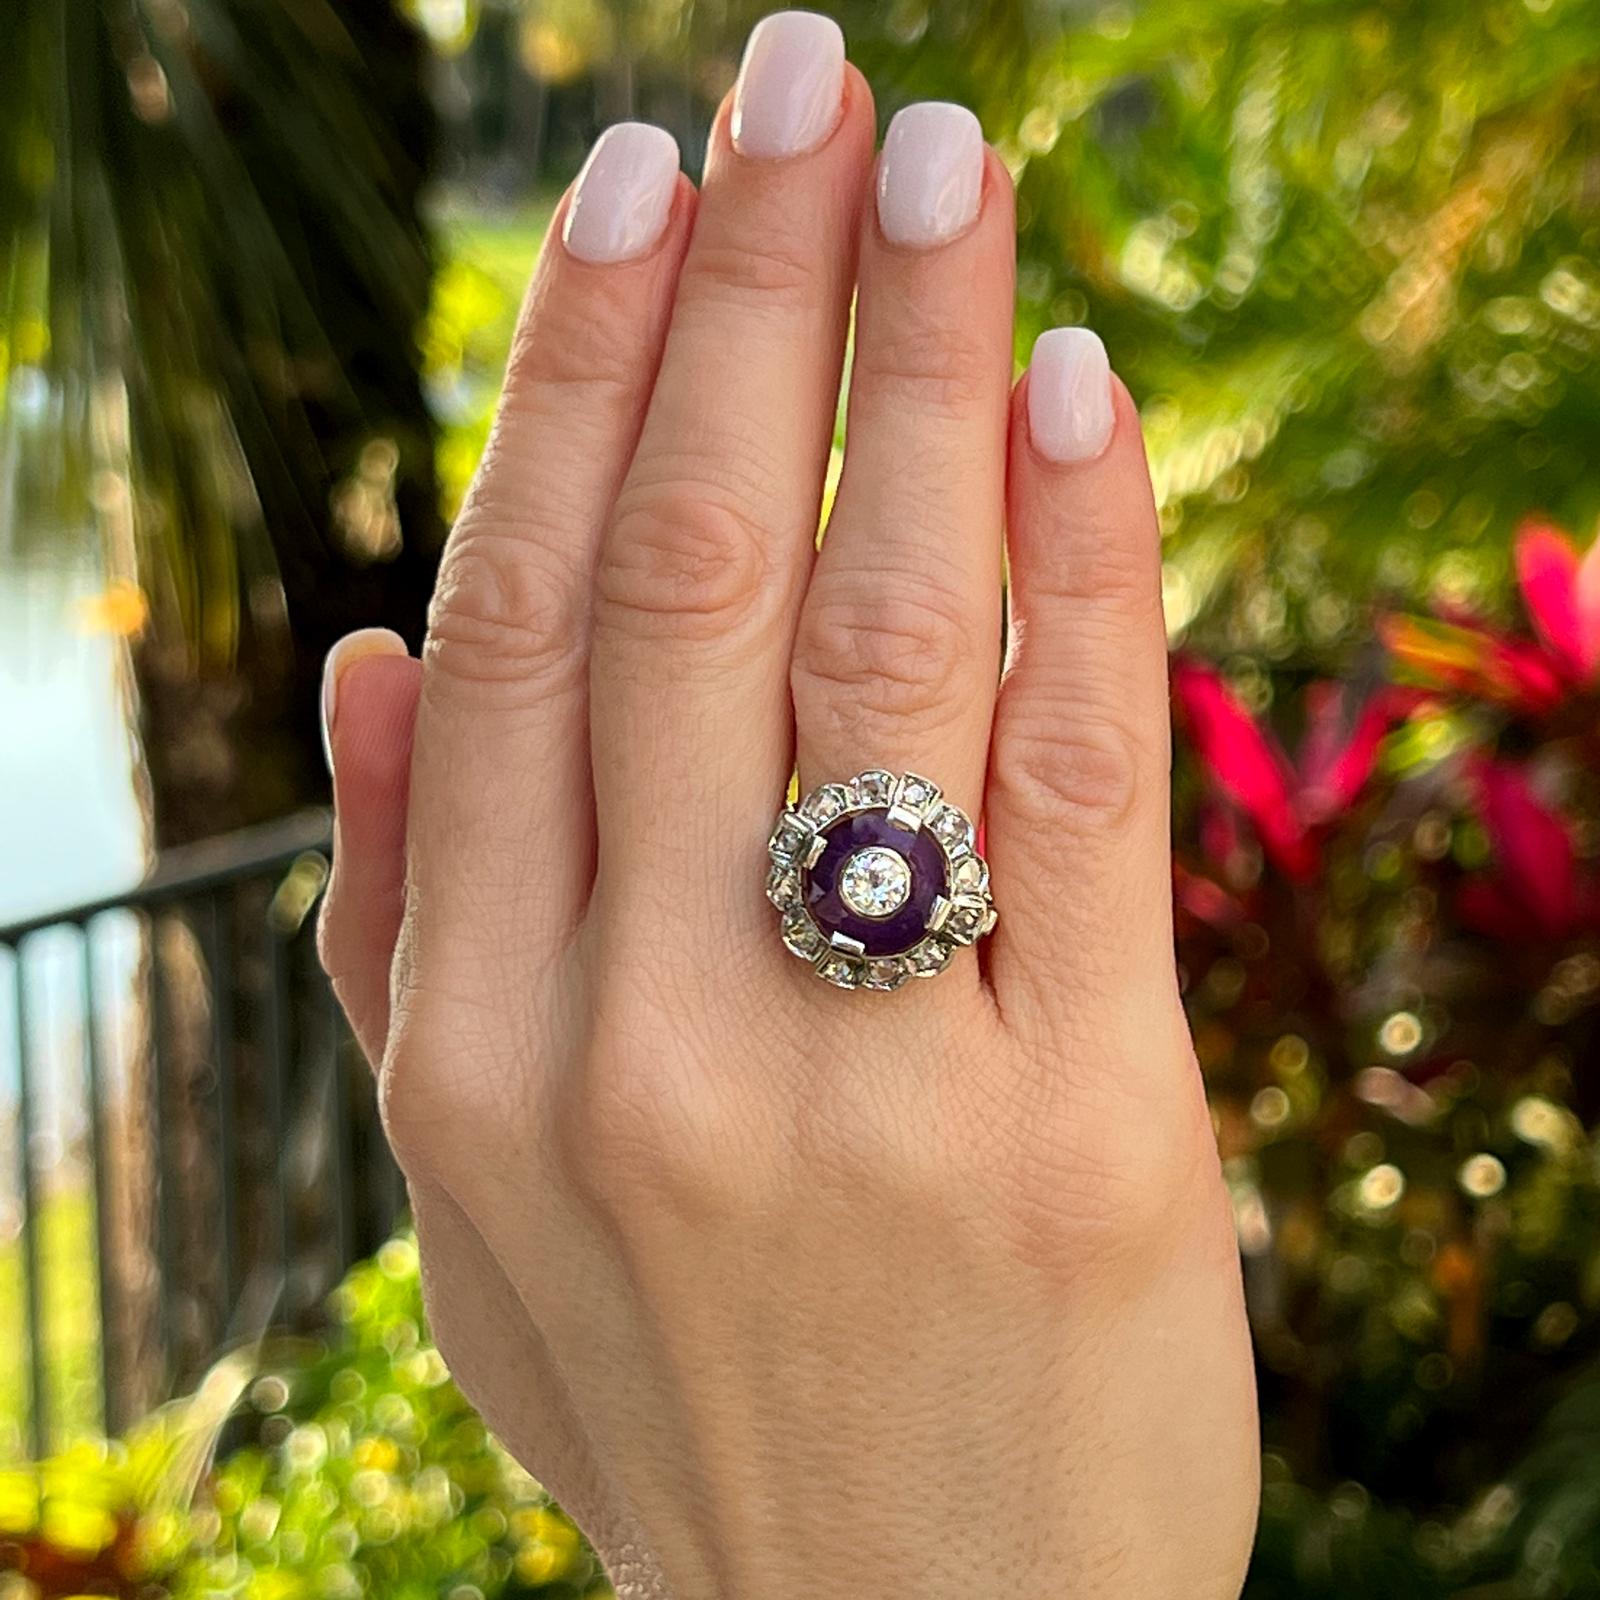 Gorgeous Art Deco diamond cocktail ring handcrafted with platinum on top and 14 karat yellow gold shank. The center Old European cut diamond weighs approximately .50 carat, is surrounded by a single amethyst carved gemstone and 12 rose cut diamonds